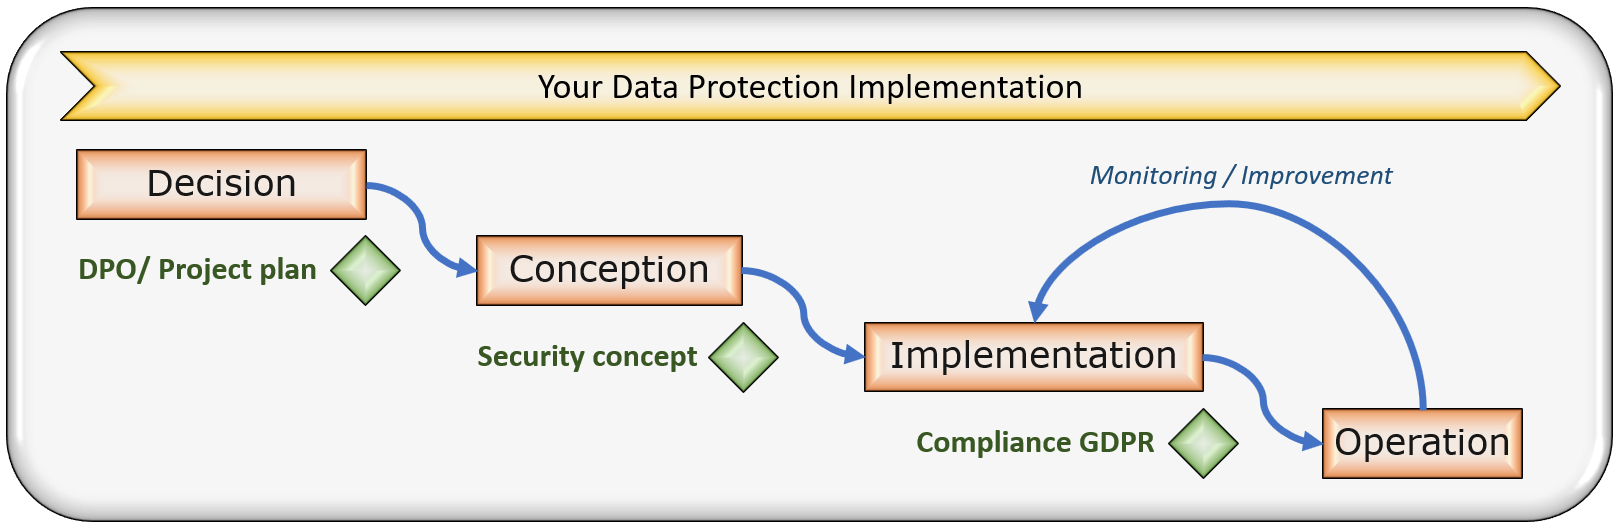 Image: Process flow - Data protection implementation - decision, conception, implementation, operation.